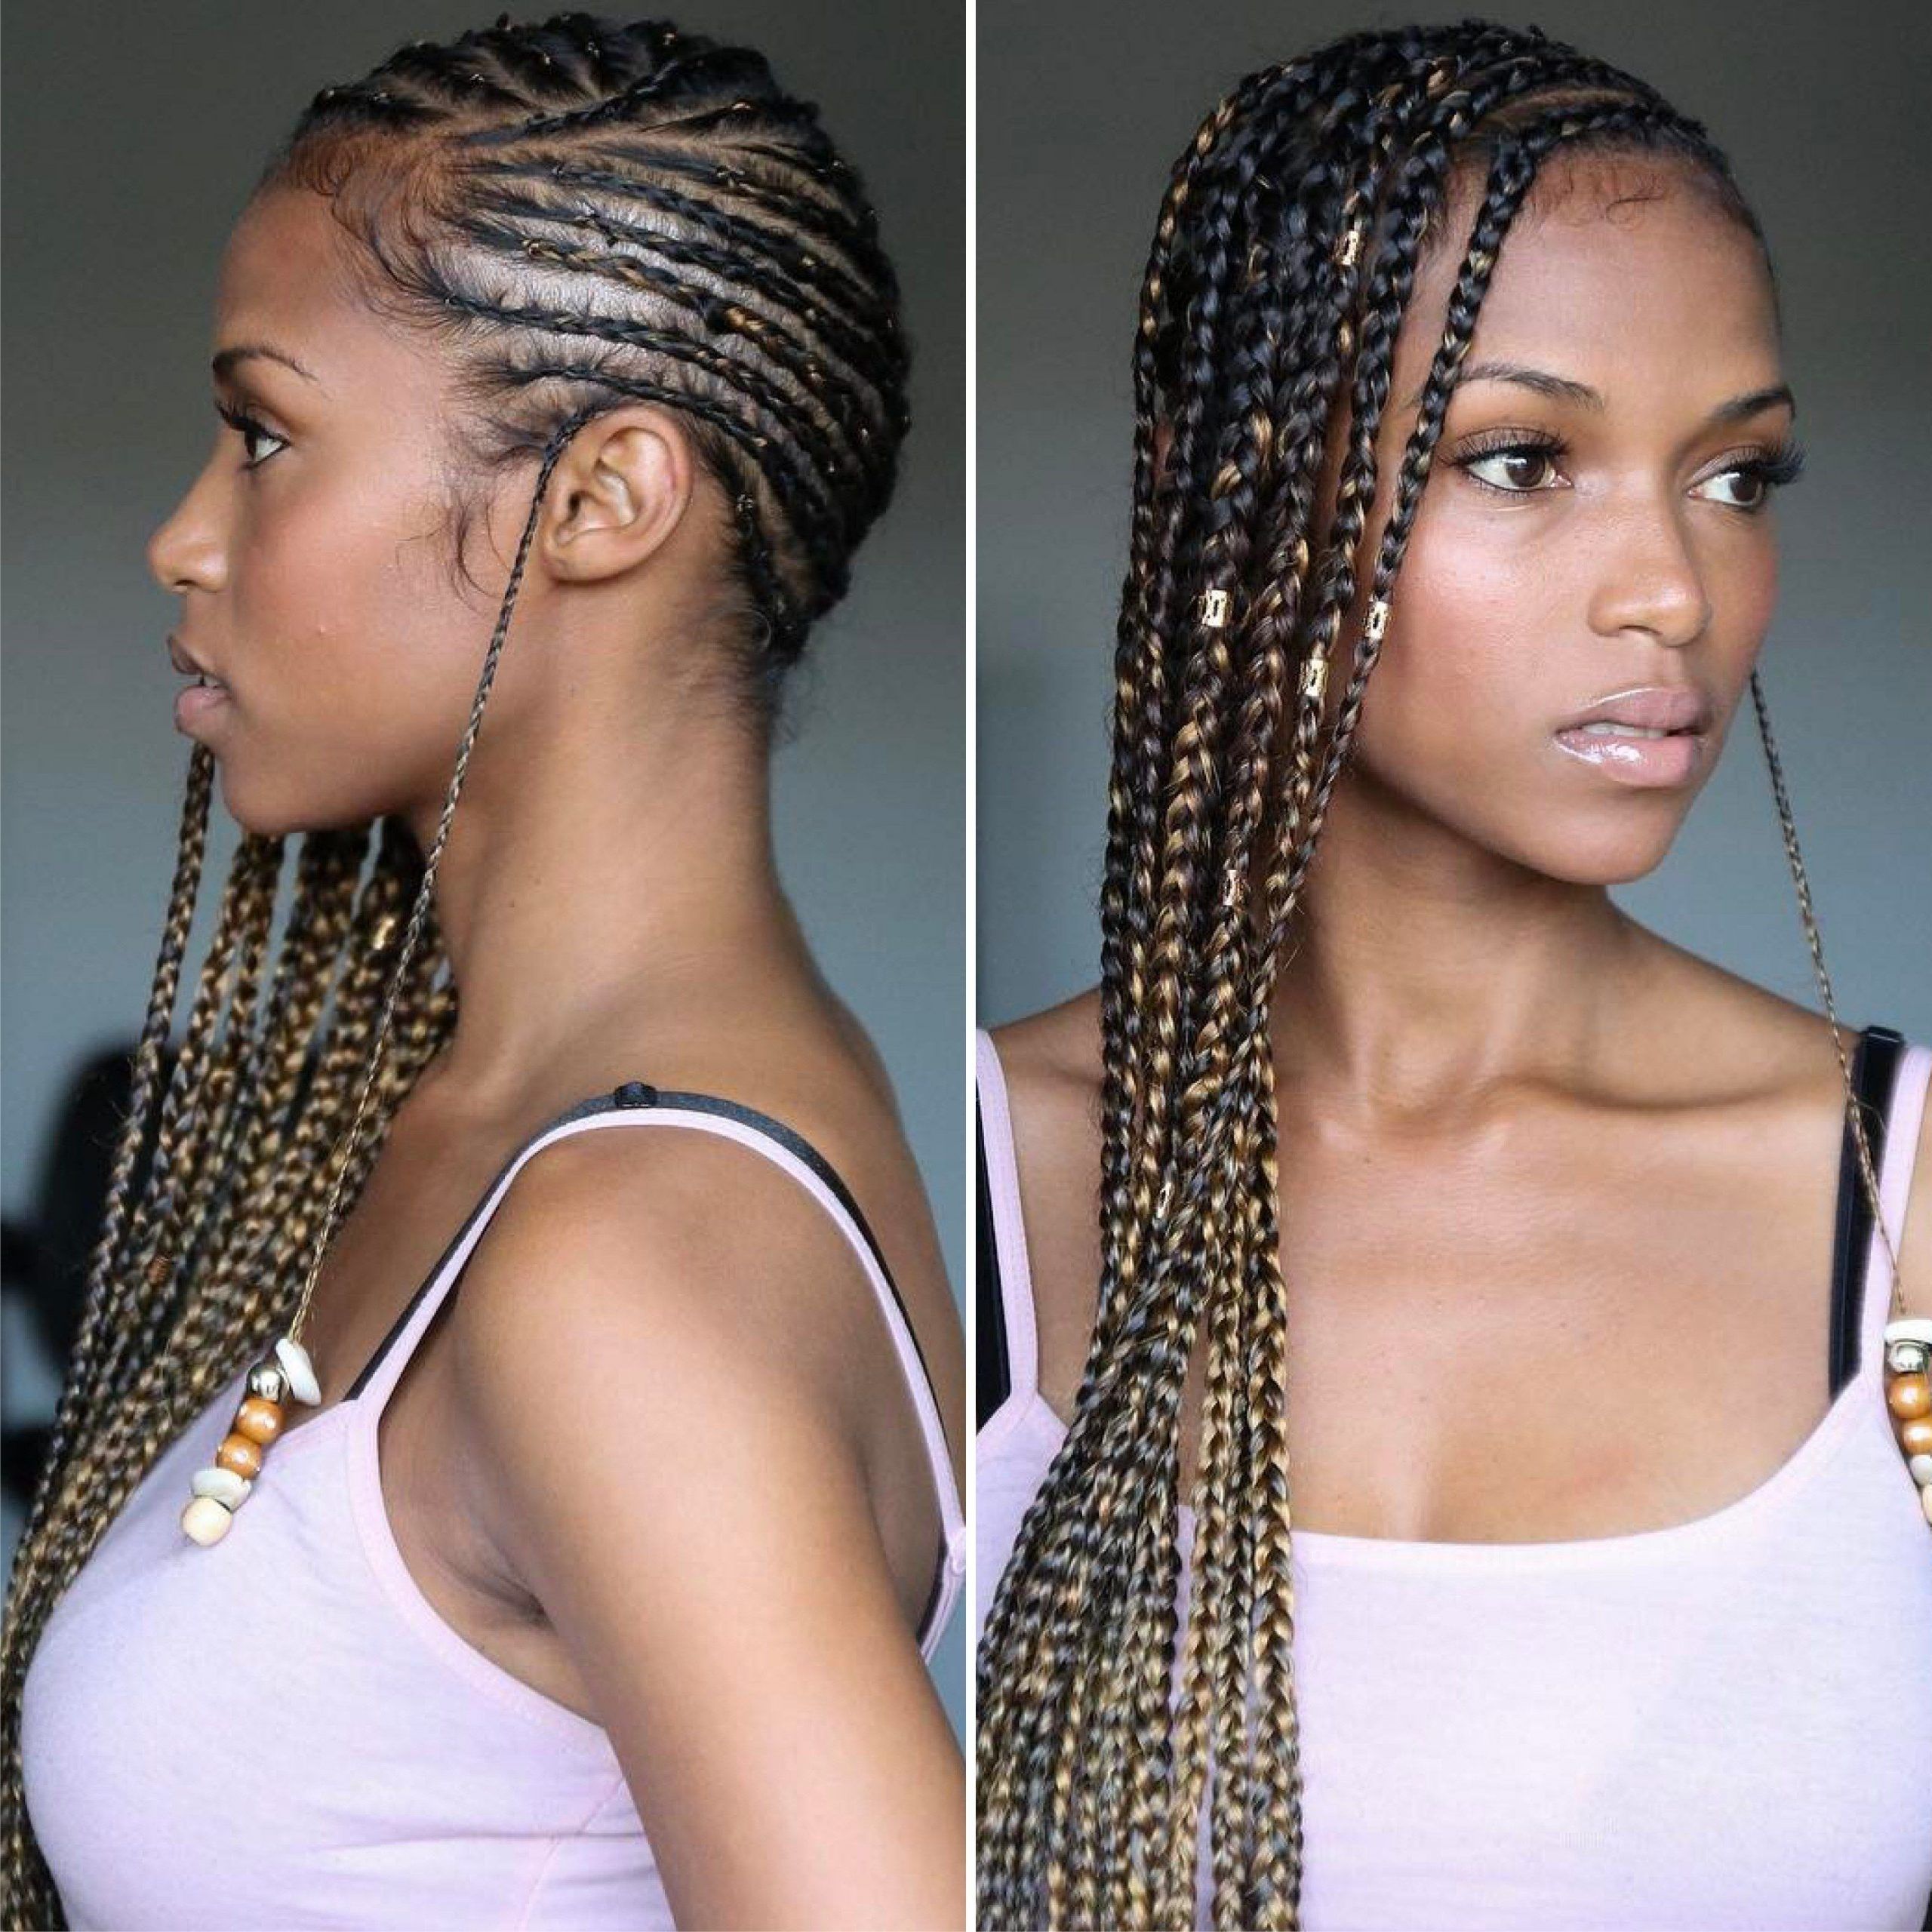 The Braids And Beads Trend Is Taking Over Instagram Pertaining To Well Liked Beaded Plaits Braids Hairstyles (View 1 of 20)